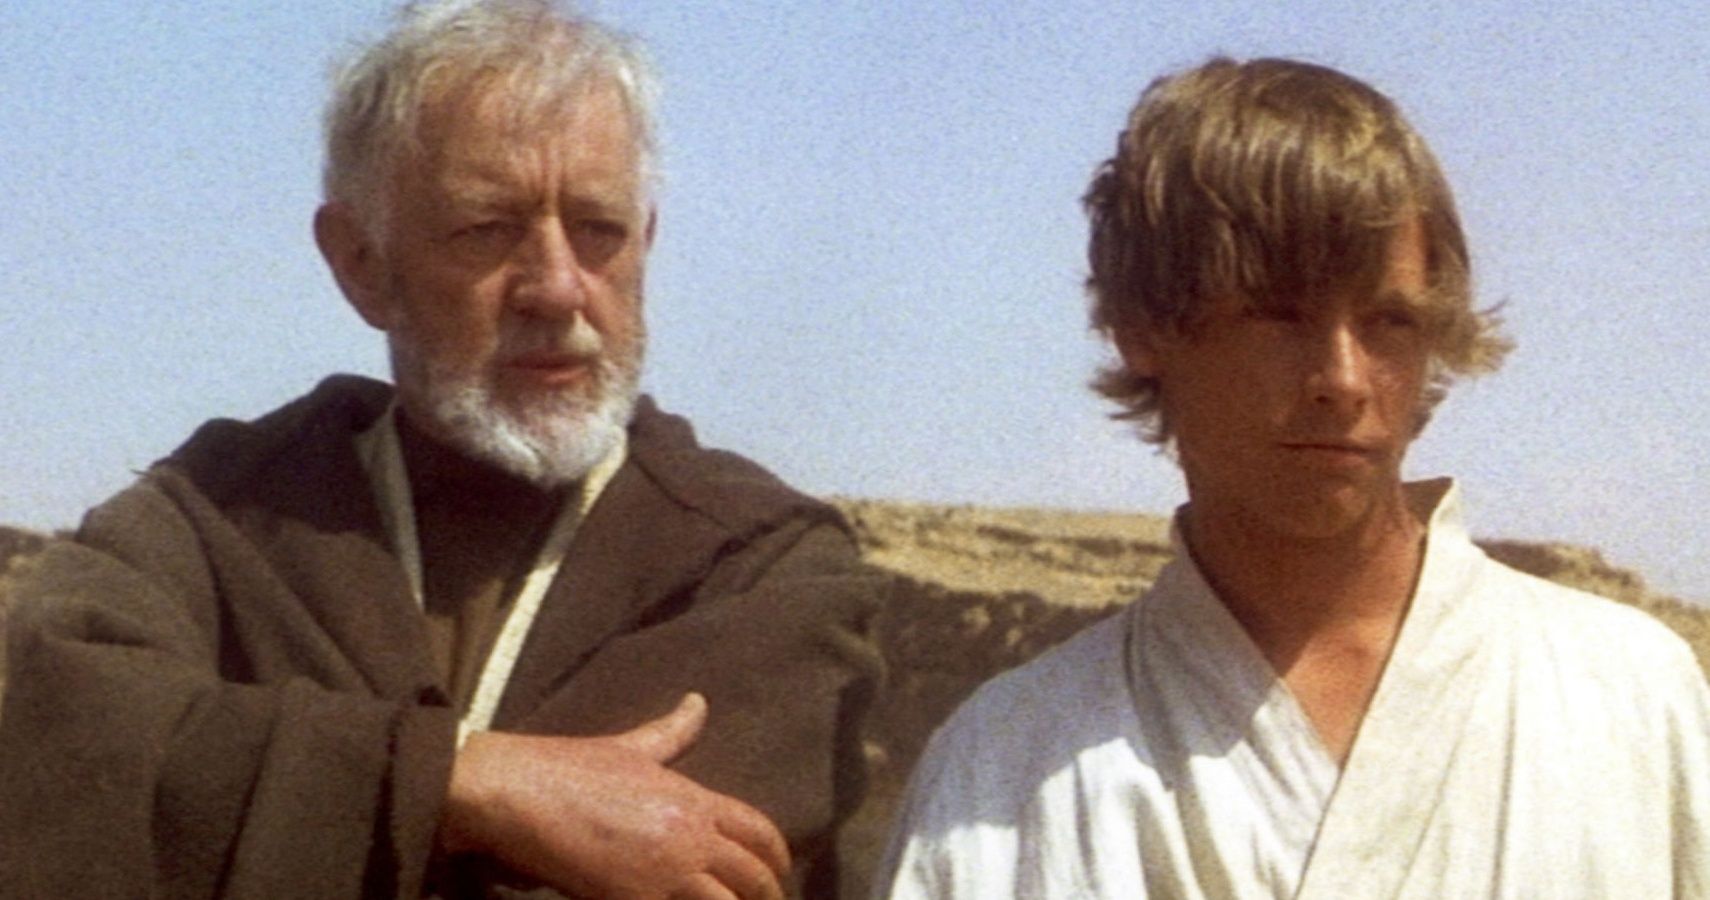 10 Best Movies Written By George Lucas According To IMDb